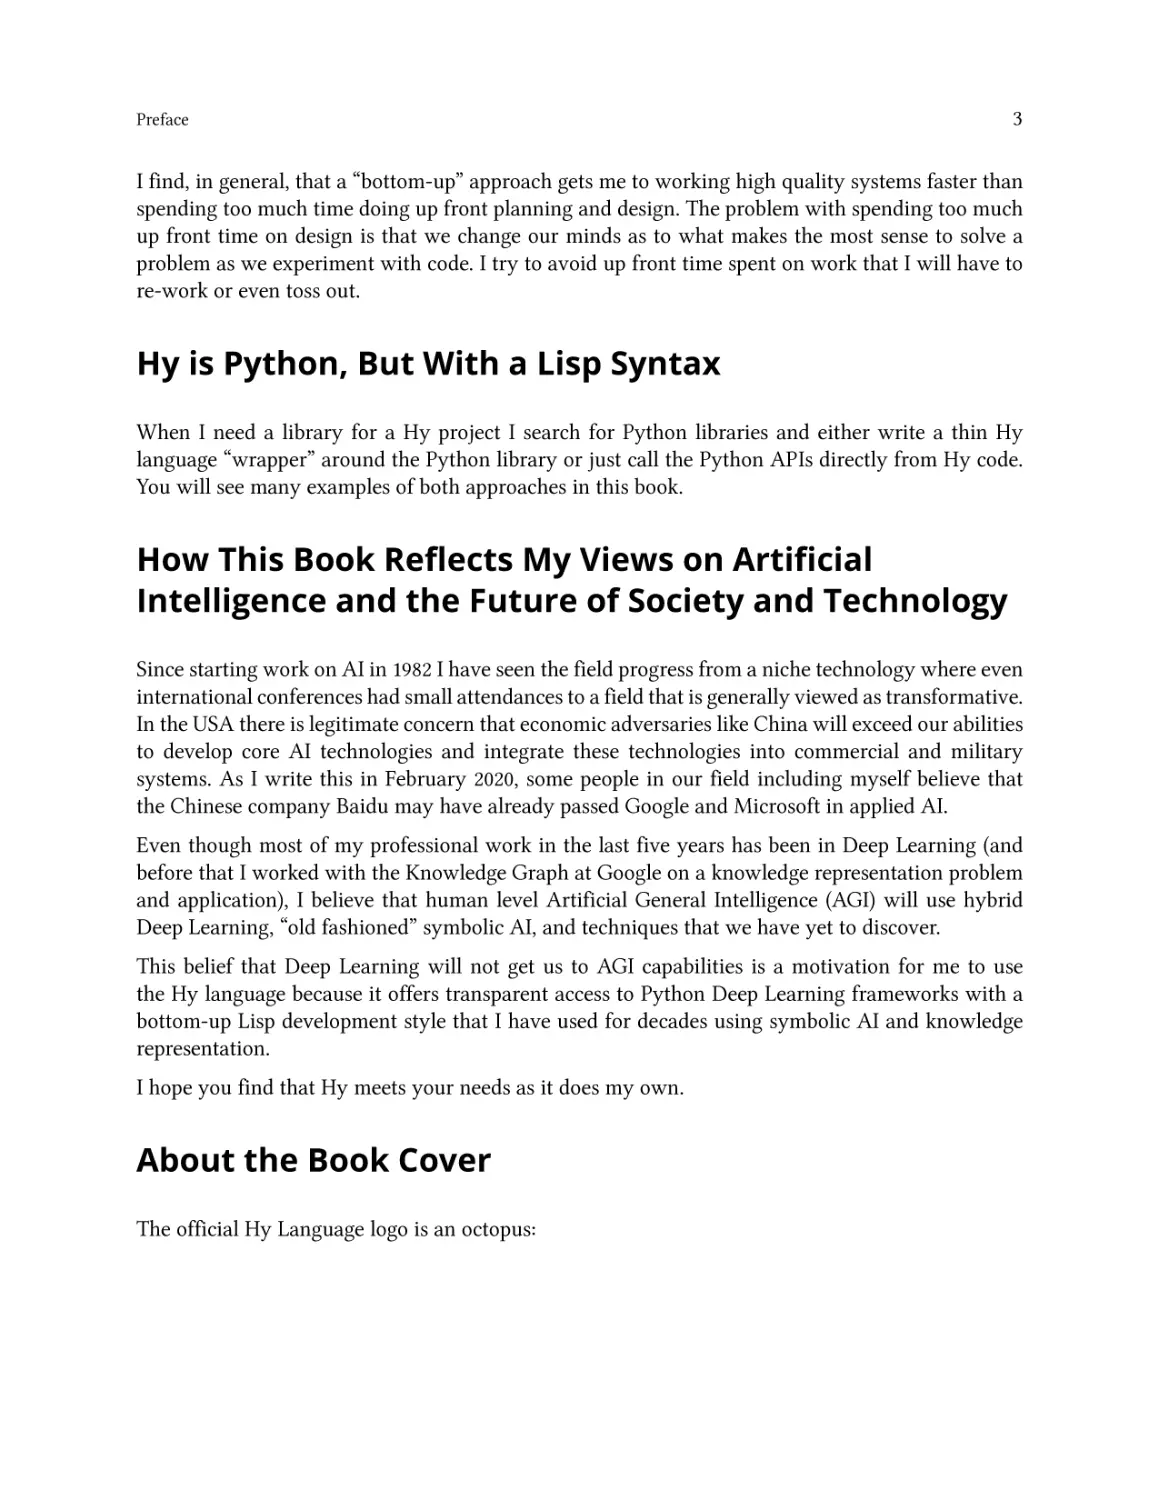 Hy is Python, But With a Lisp Syntax
How This Book Reflects My Views on Artificial Intelligence and the Future of Society and Technology
About the Book Cover